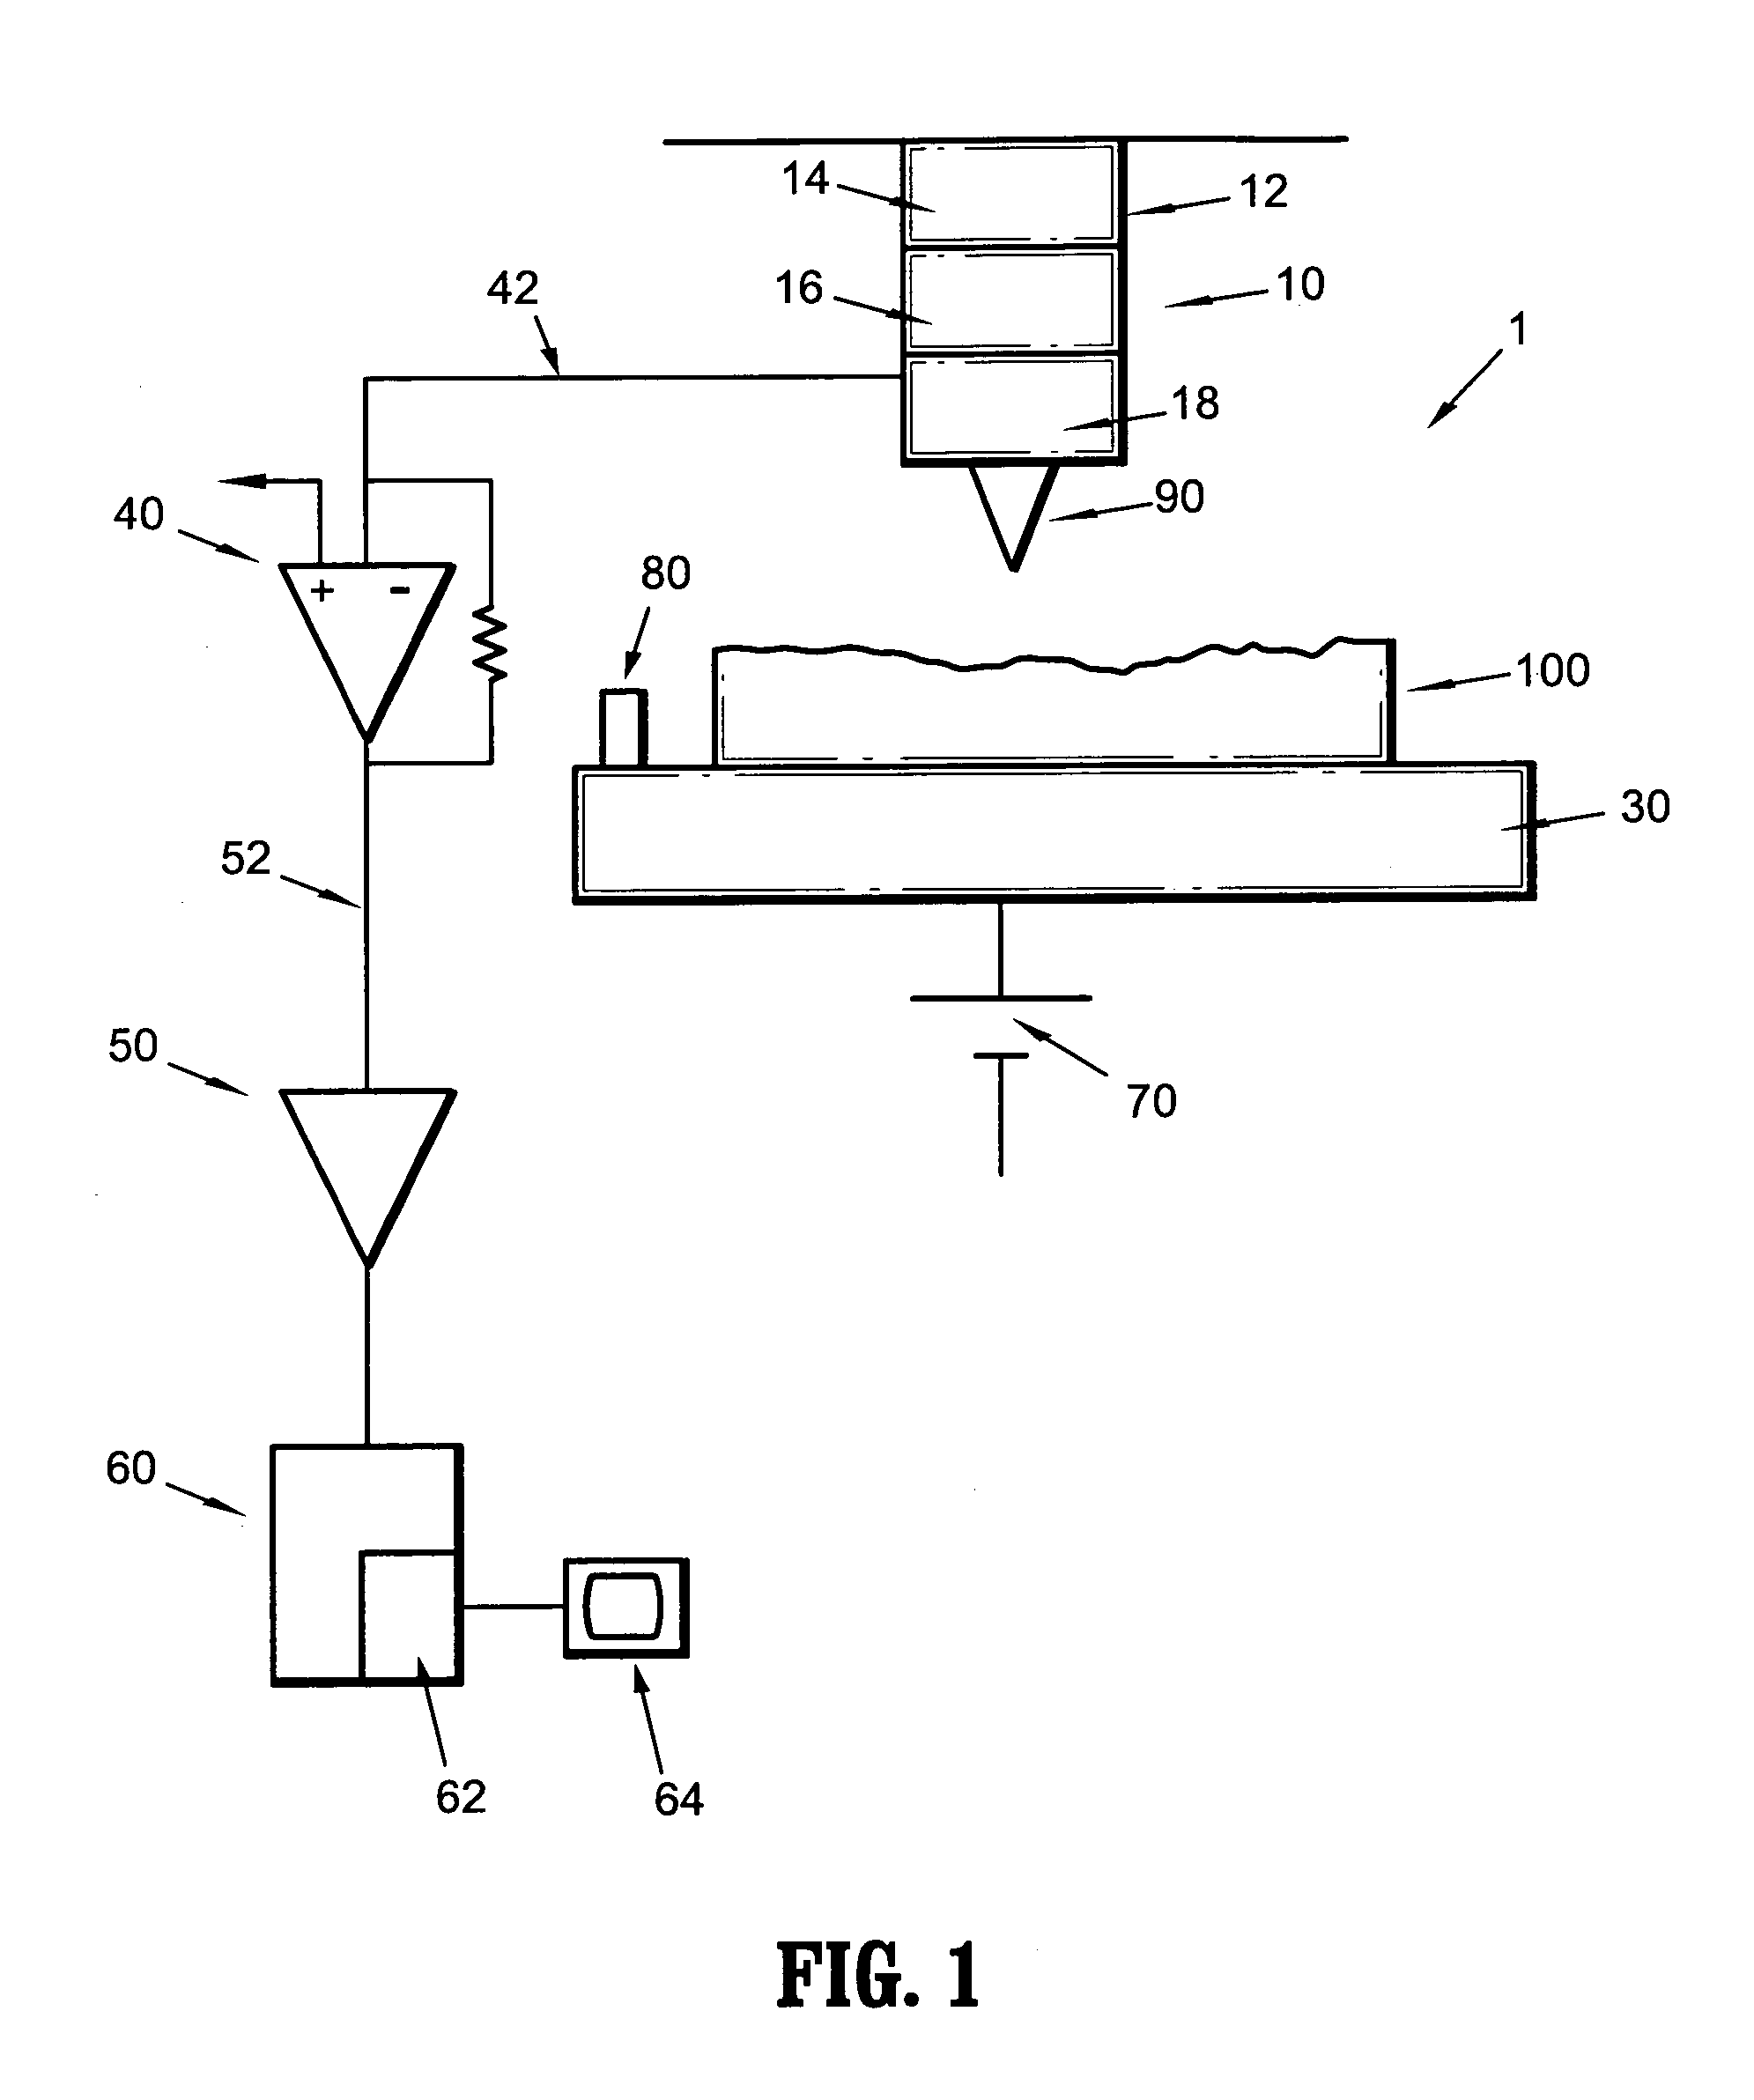 Atomic force microscope and method for determining properties of a sample surface using an atomic force microscope